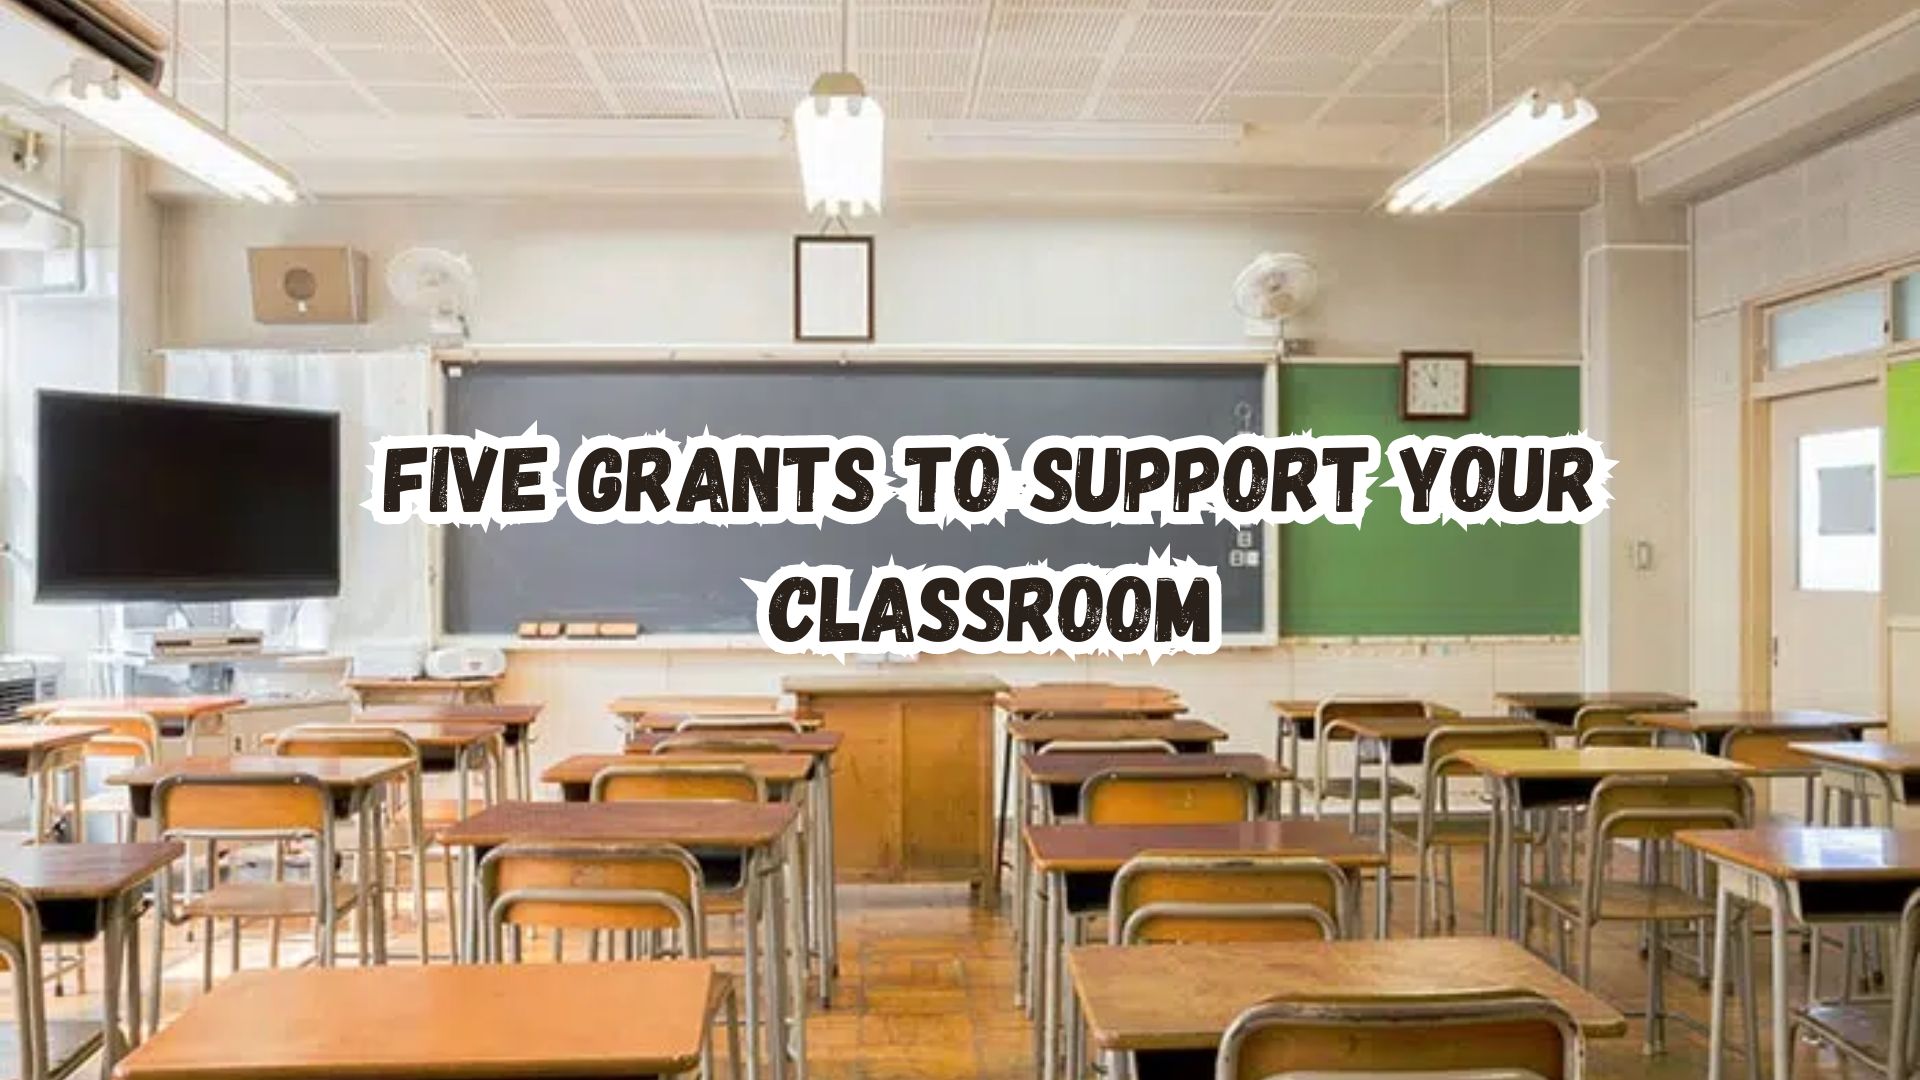 Five Grants to Support Your Classroom.